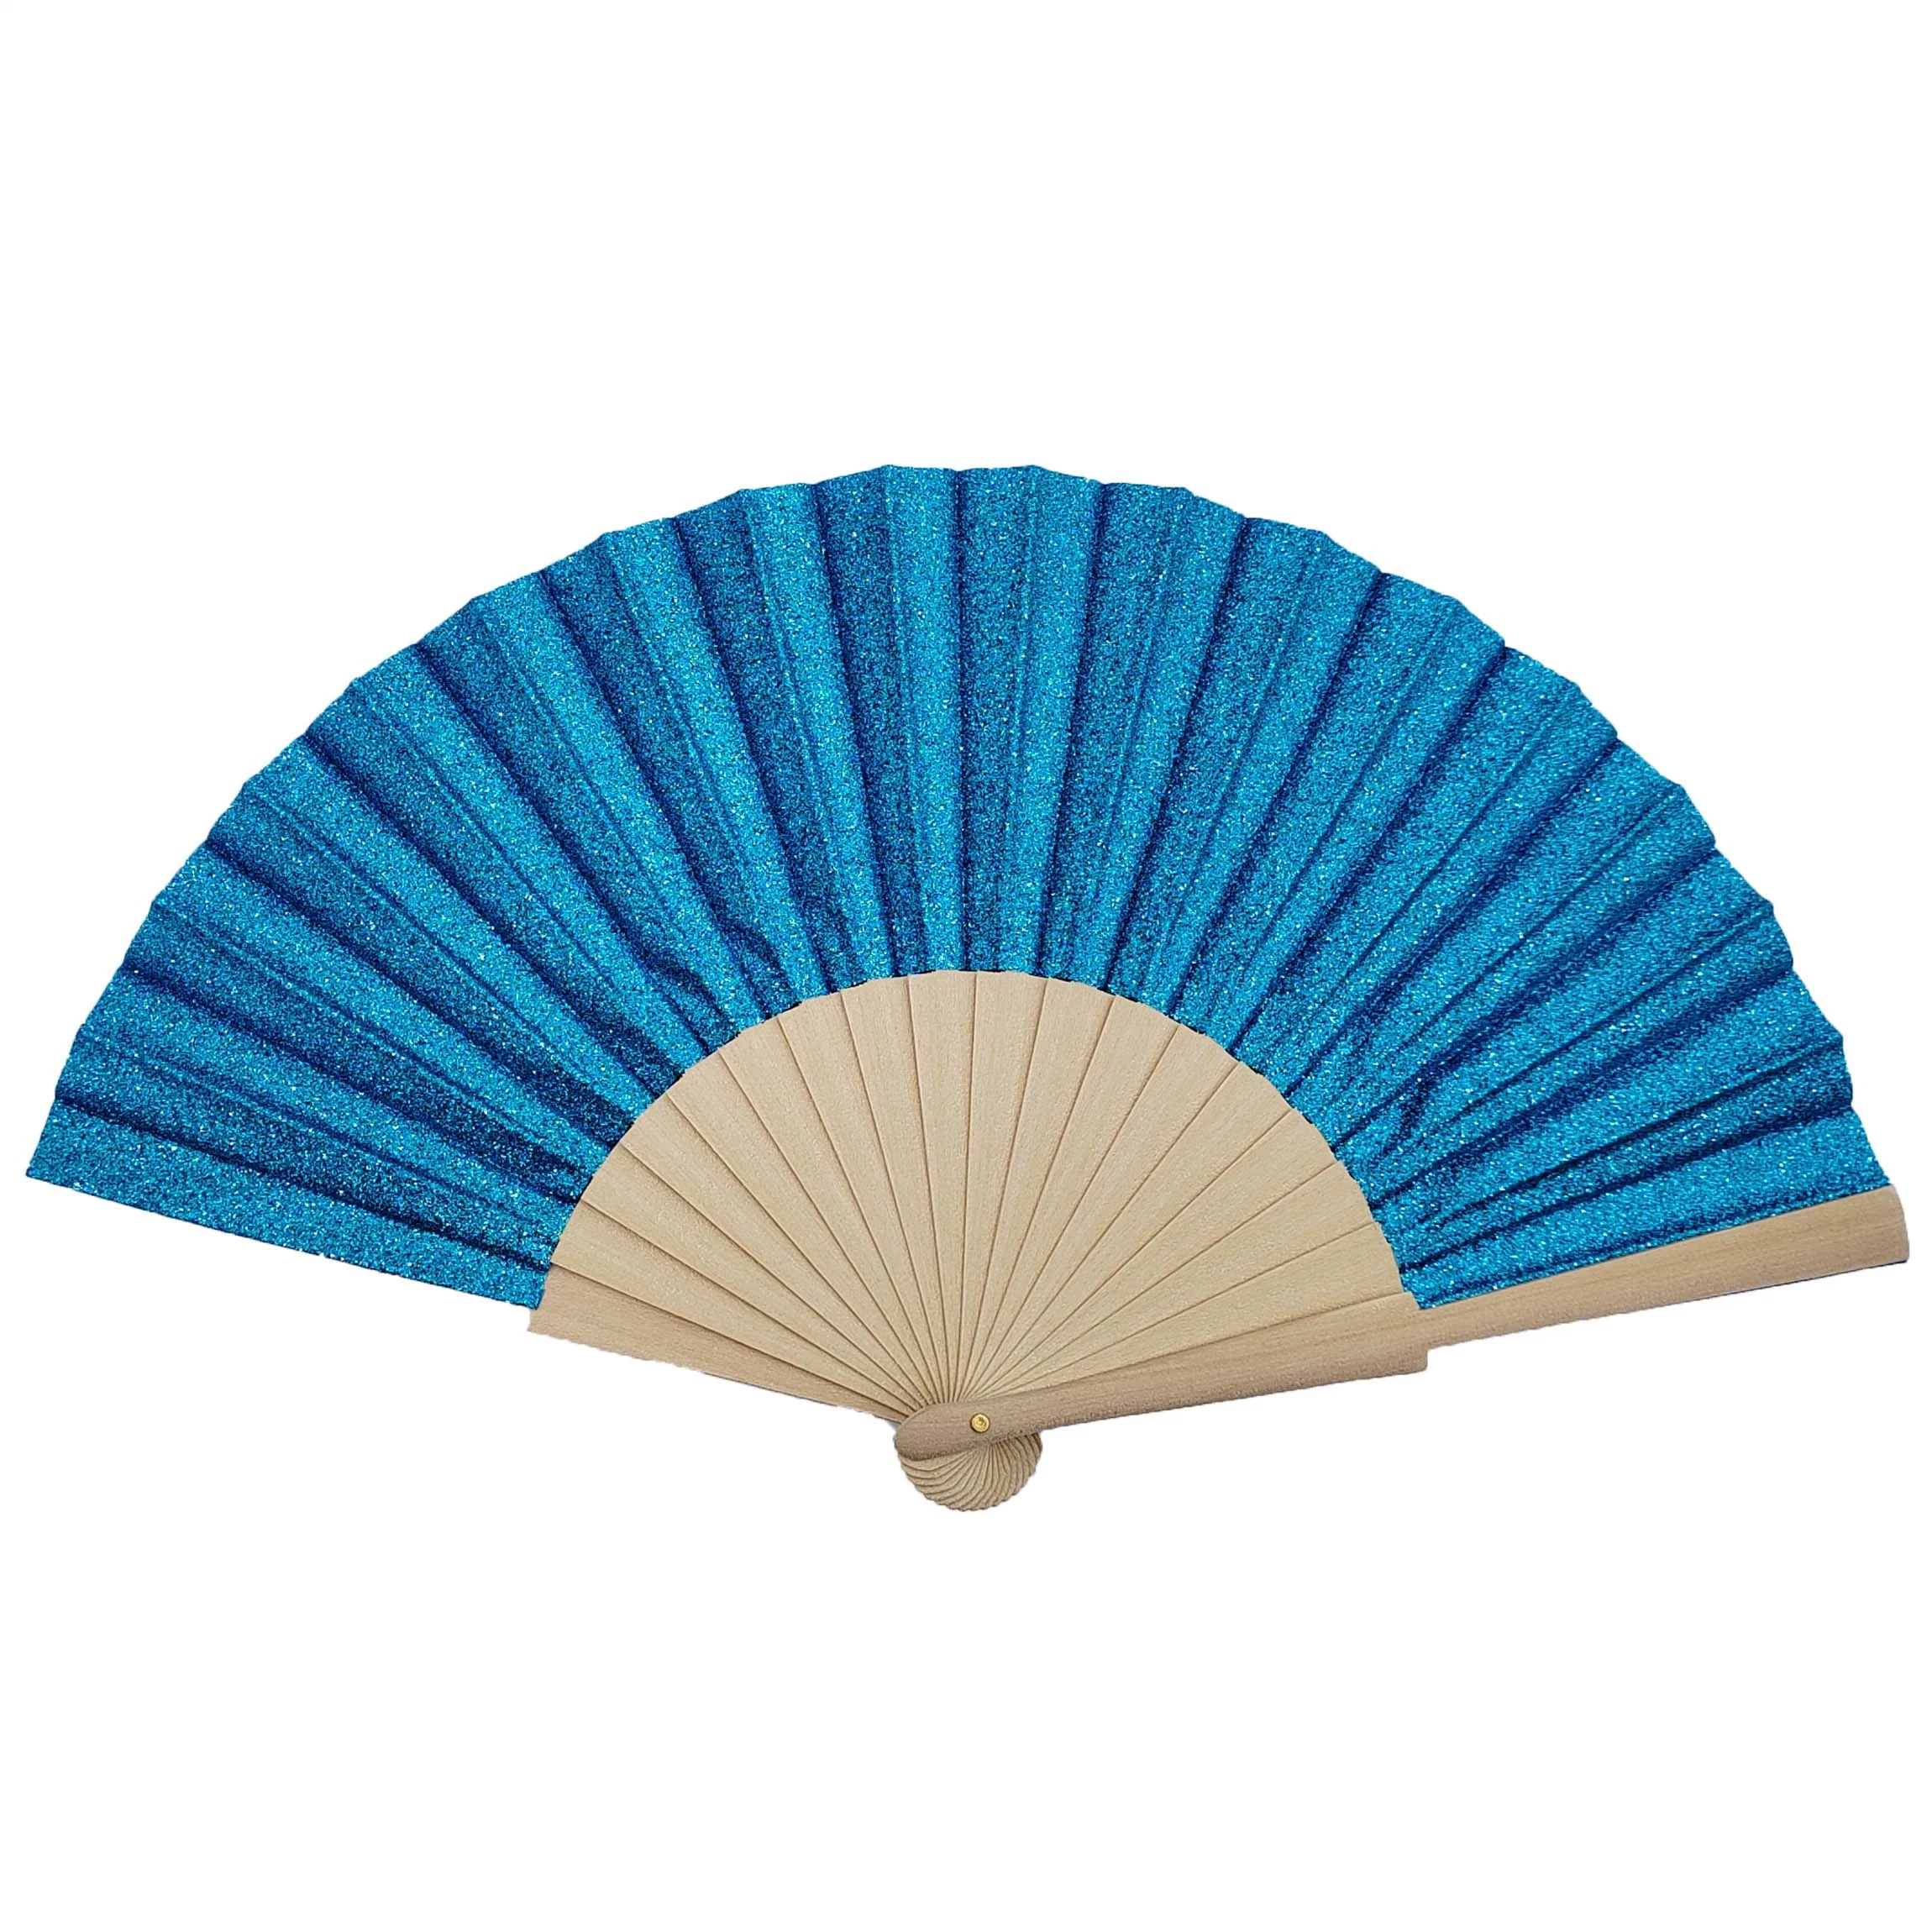 Customize Shiny Fabric Hand Fans of Various Colors Wood Ribs and Bling Bling Folding Hand Fan